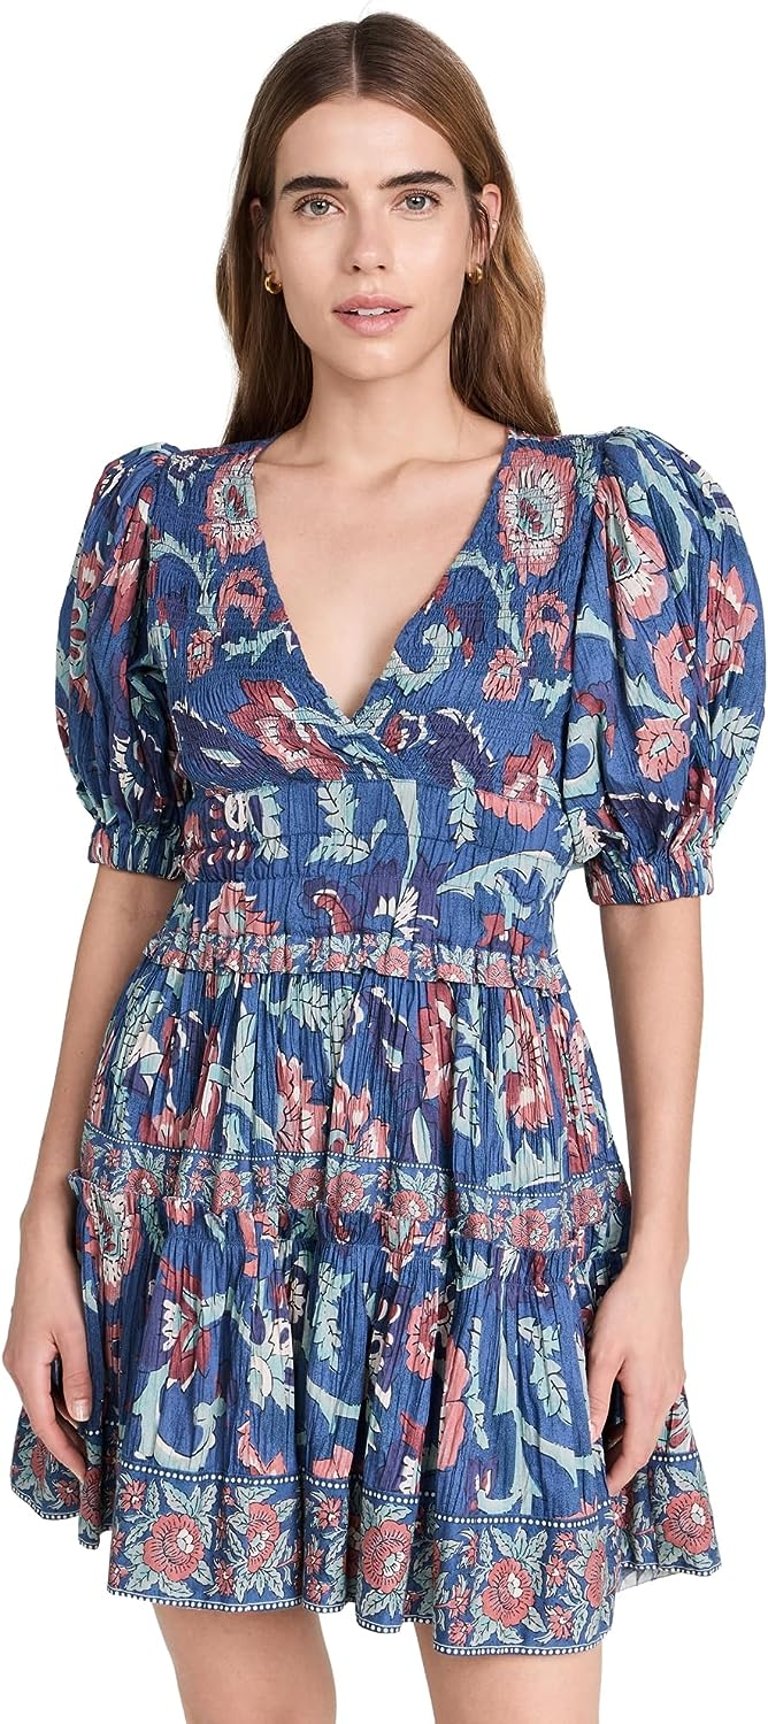 Women's Rory Print Puff Sleeve Dress - Multicolor